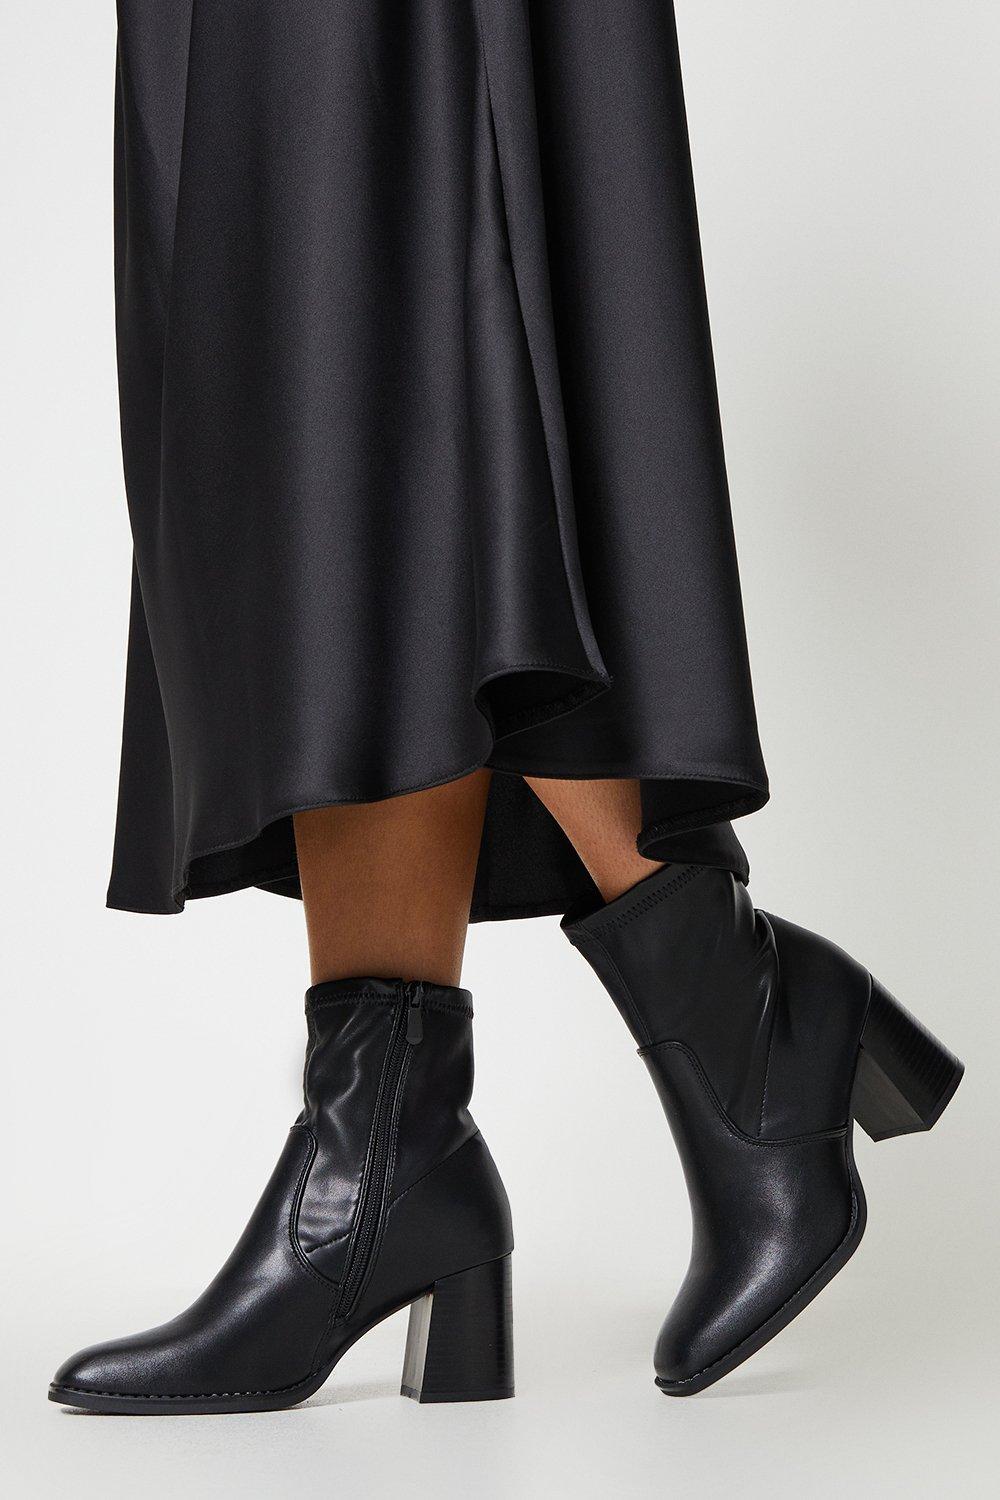 Square Toe Stacked Mid Heel Ankle Bootsblack